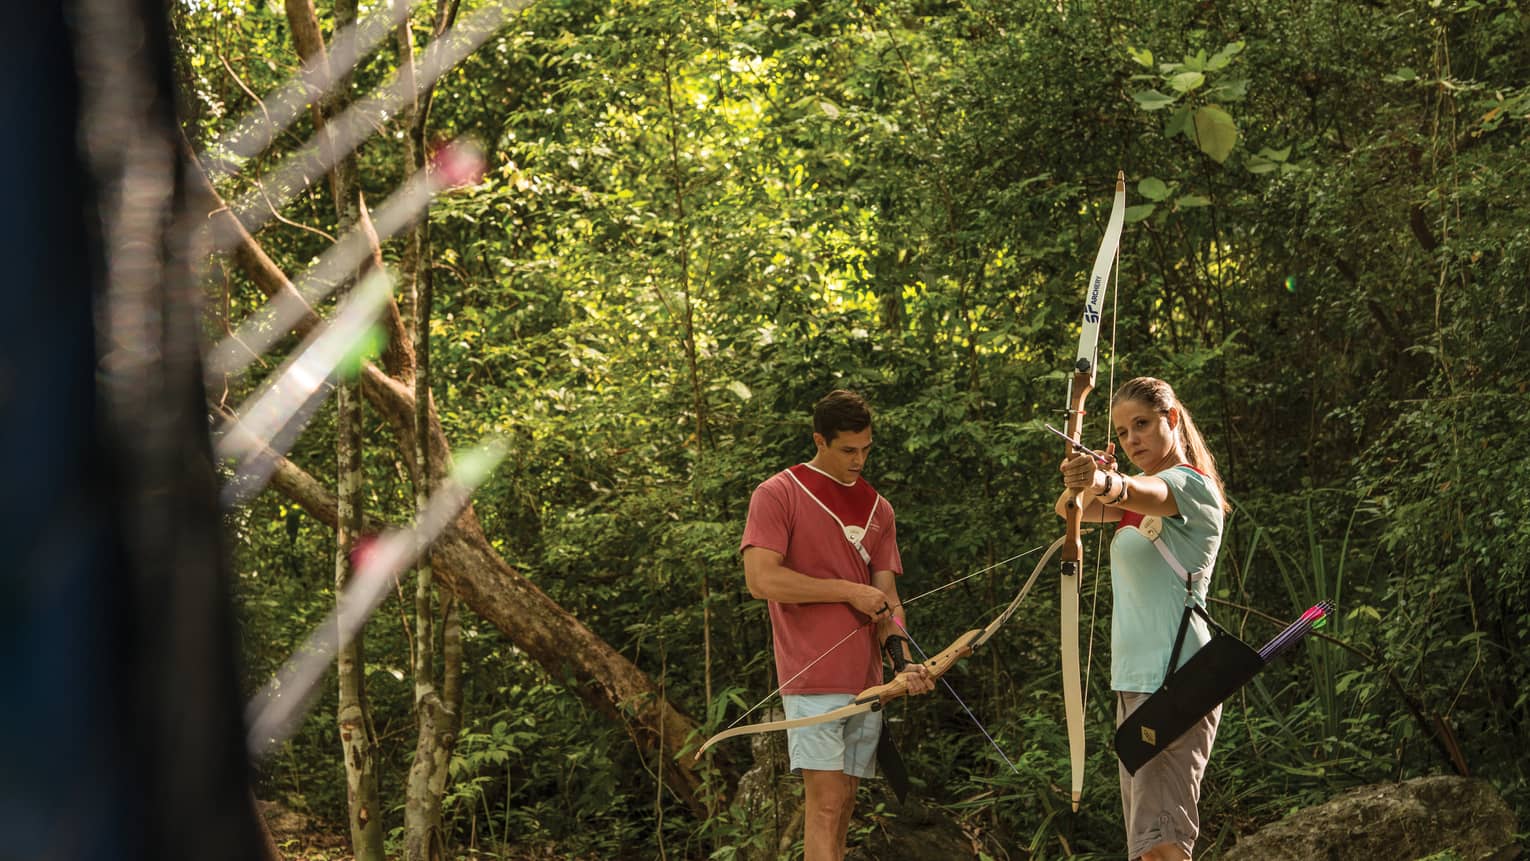 Couple practices archery in the Langkawi jungle